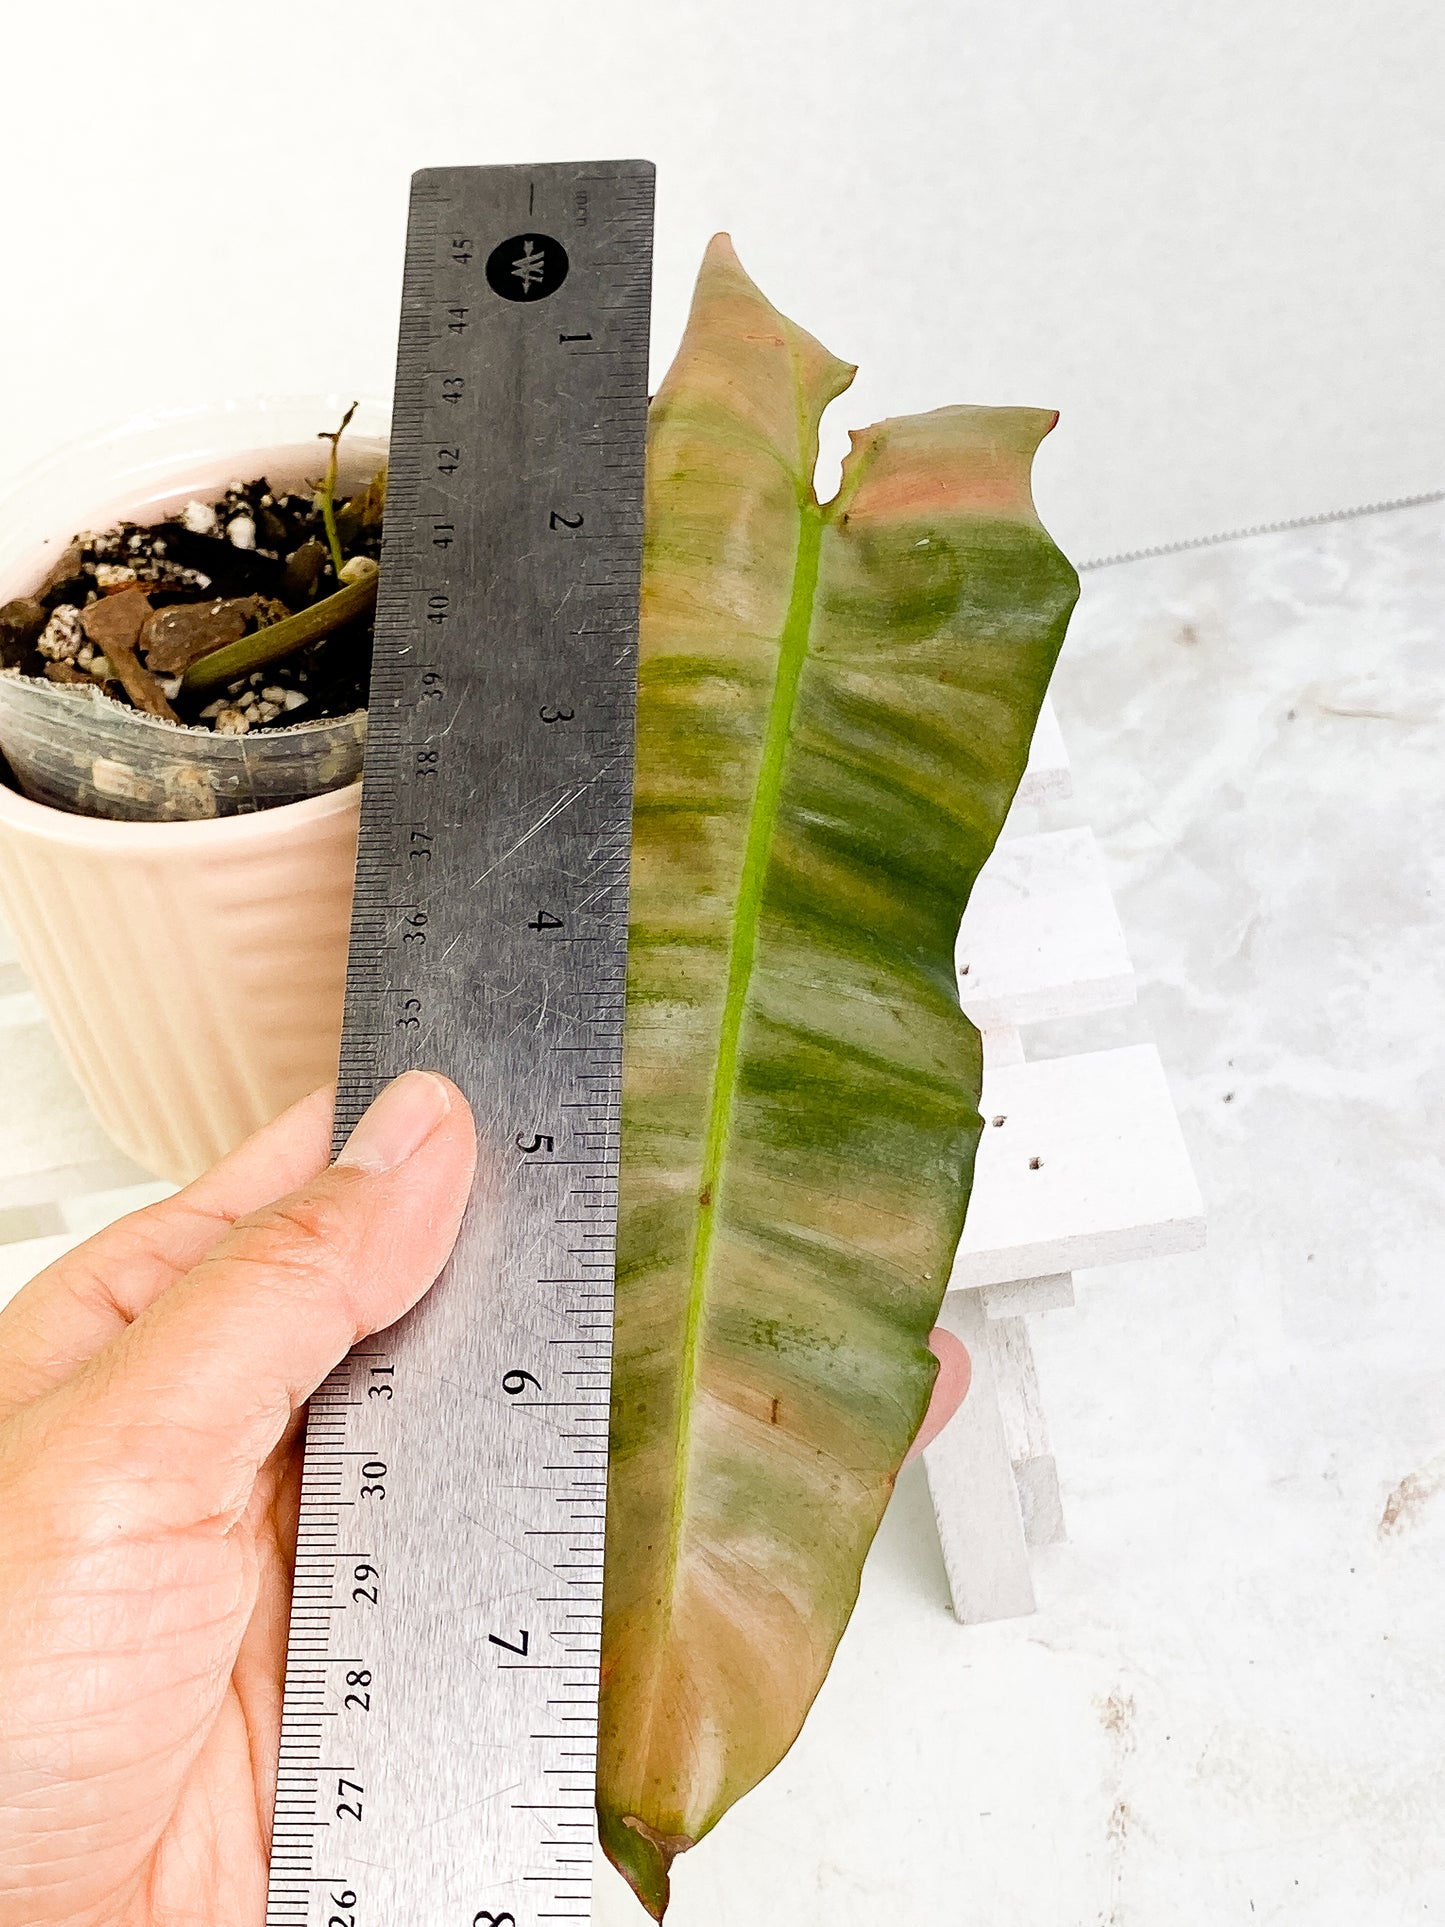 Philodendron Atabapoense x Billietiae cutting with 1 leaf rooted